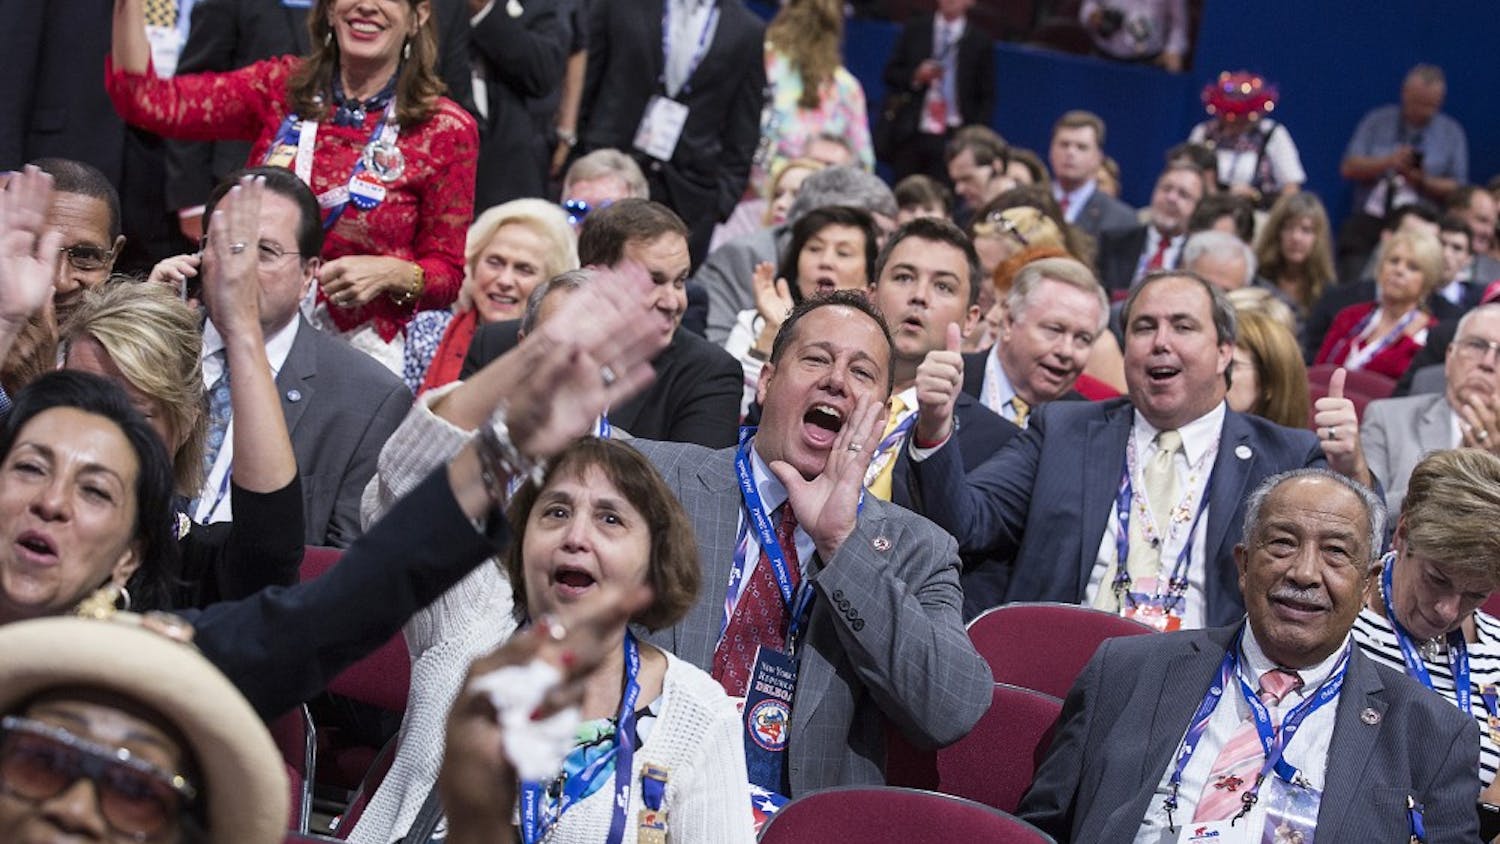 Delegates cheer after GOP officials upheld a voice vote on a rules package during the Republican National Convention in Cleveland on Monday, July 18, 2016. (Brian van der Brug/Los Angeles Times/TNS)